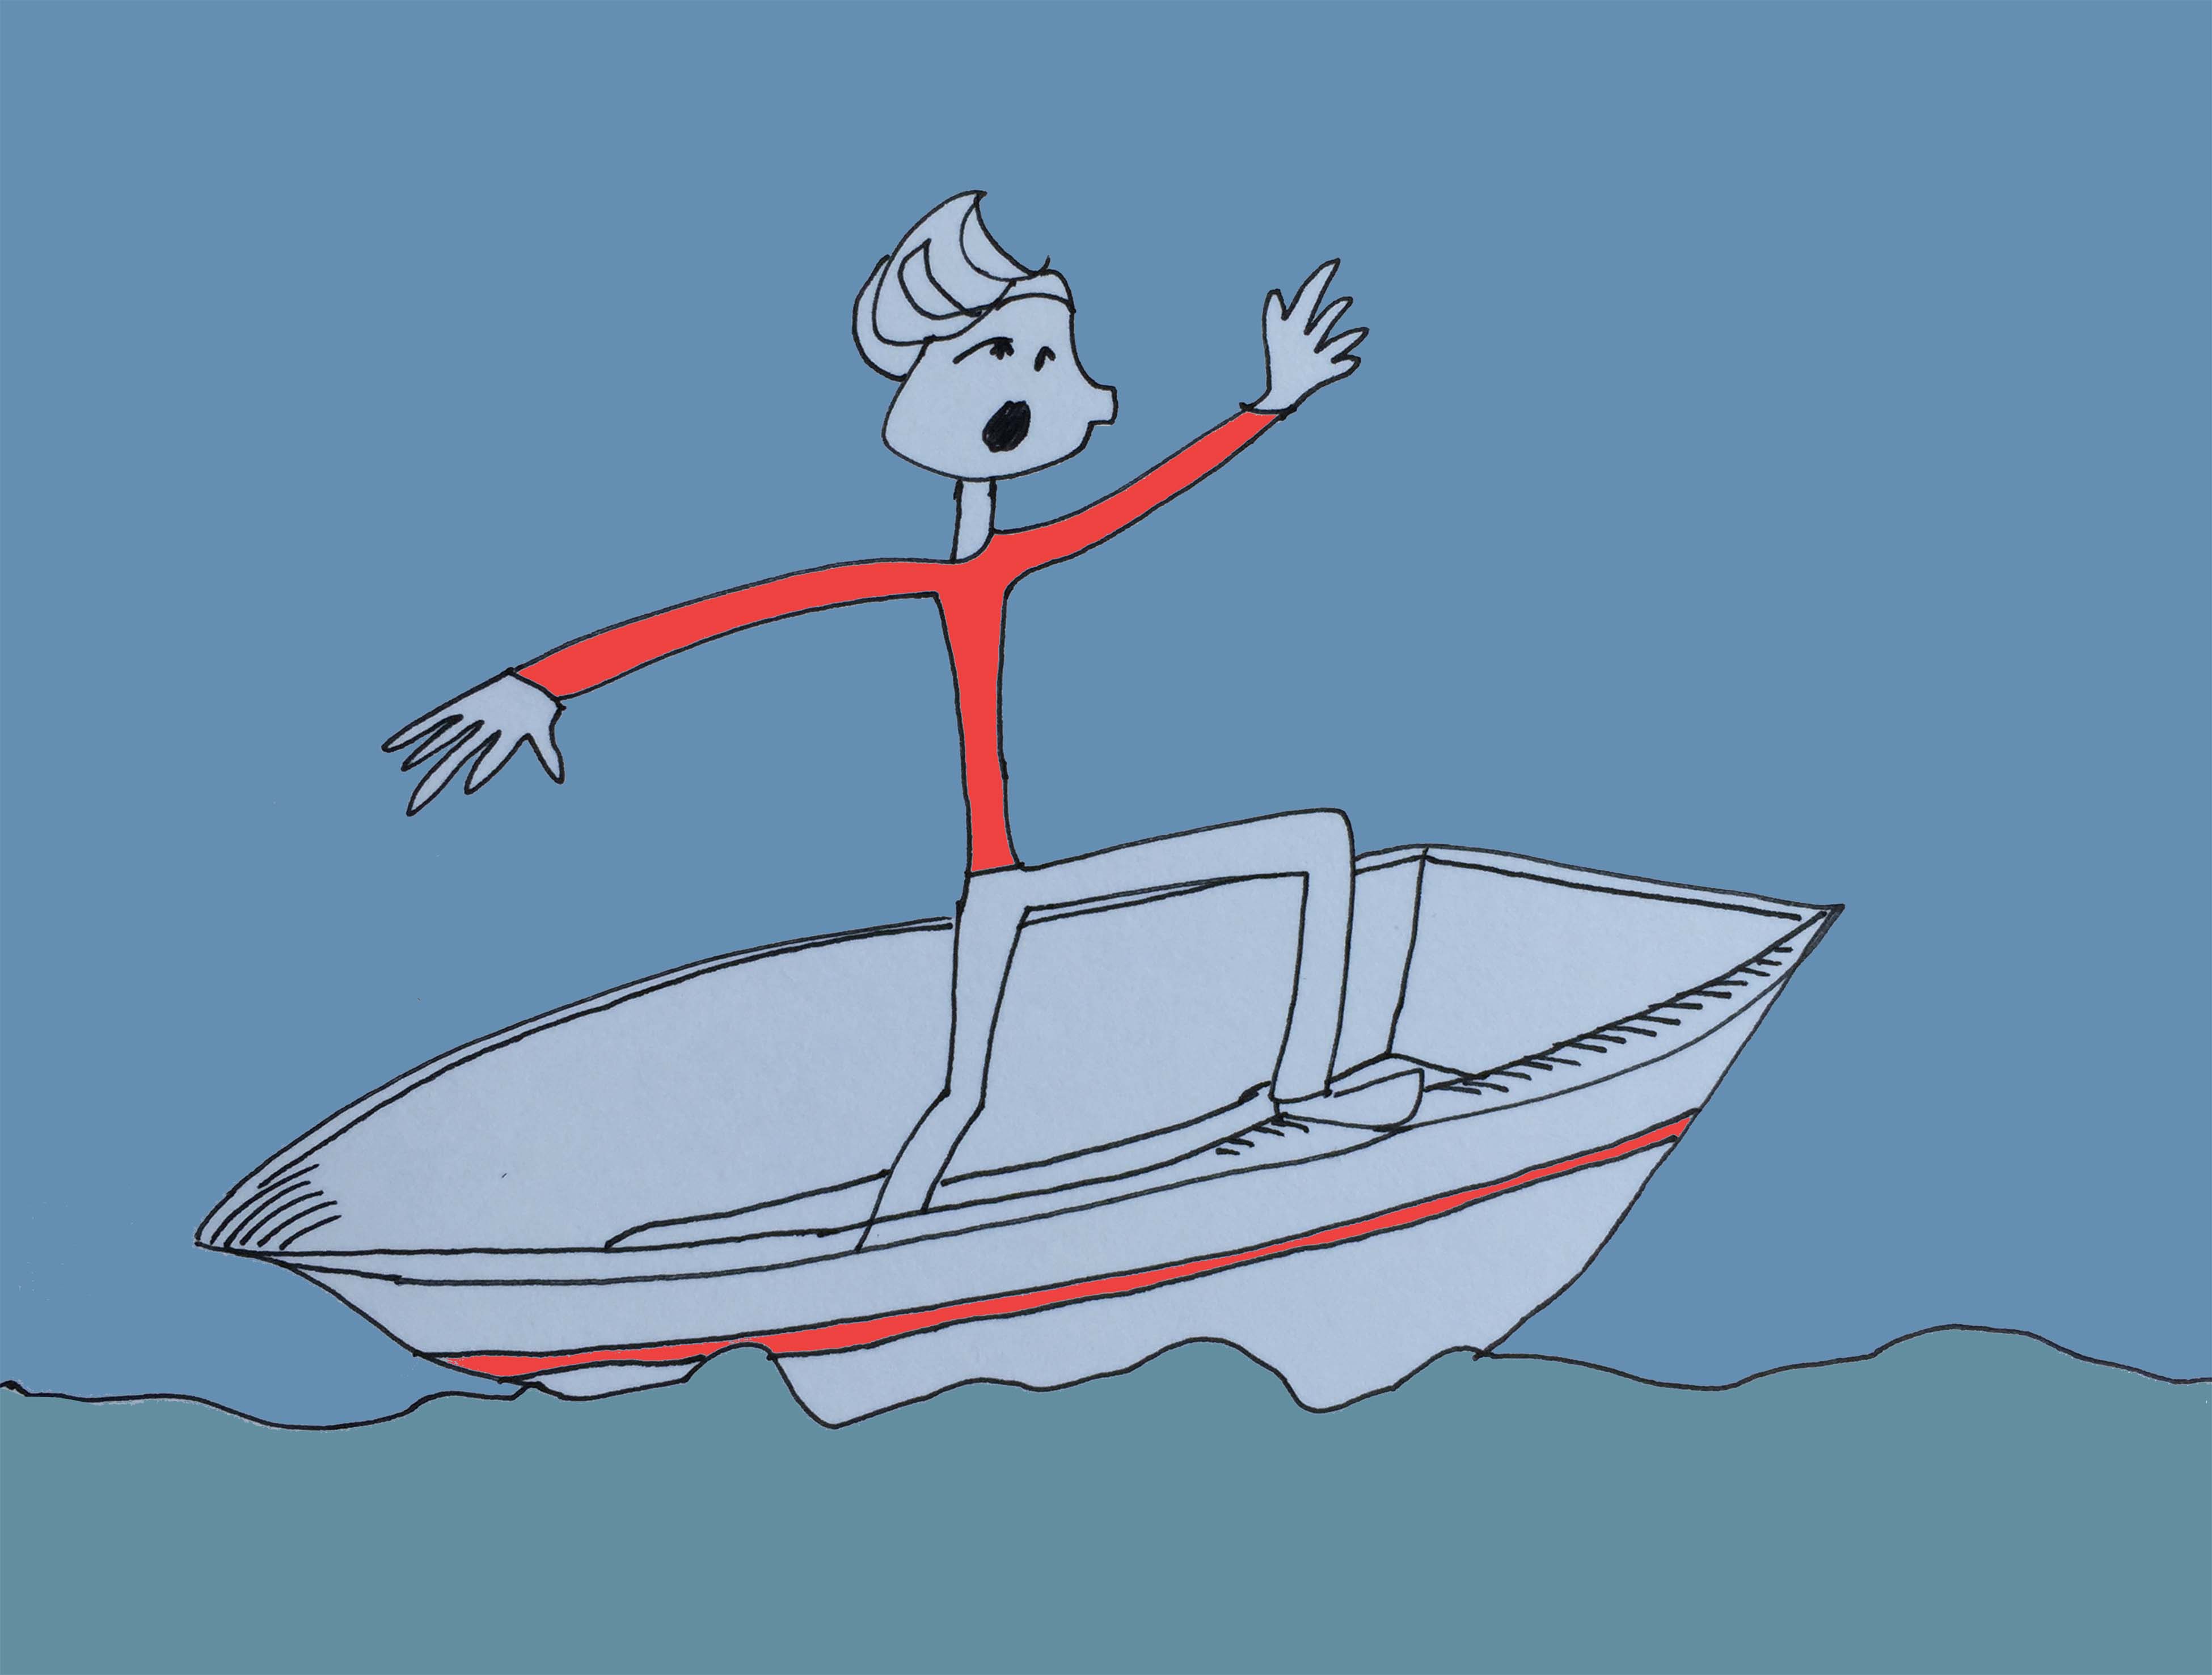 art every day number 155 / illustration / drawing / the boat